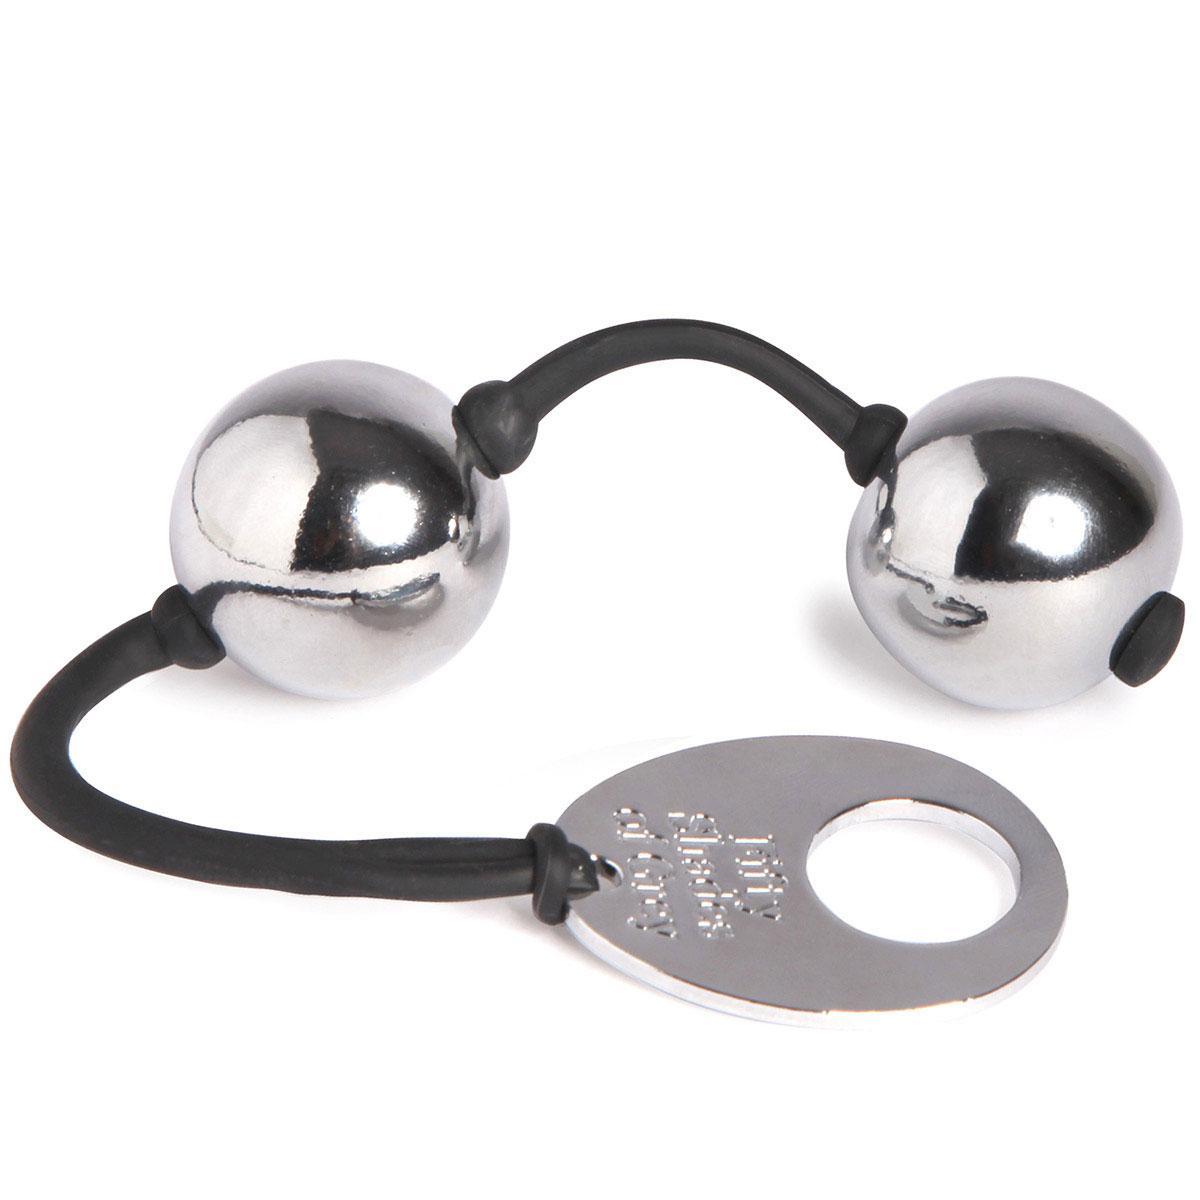 Fifty Shades Inner Goddess Silver Metal Pleasure Balls - Buy At Luxury Toy X - Free 3-Day Shipping